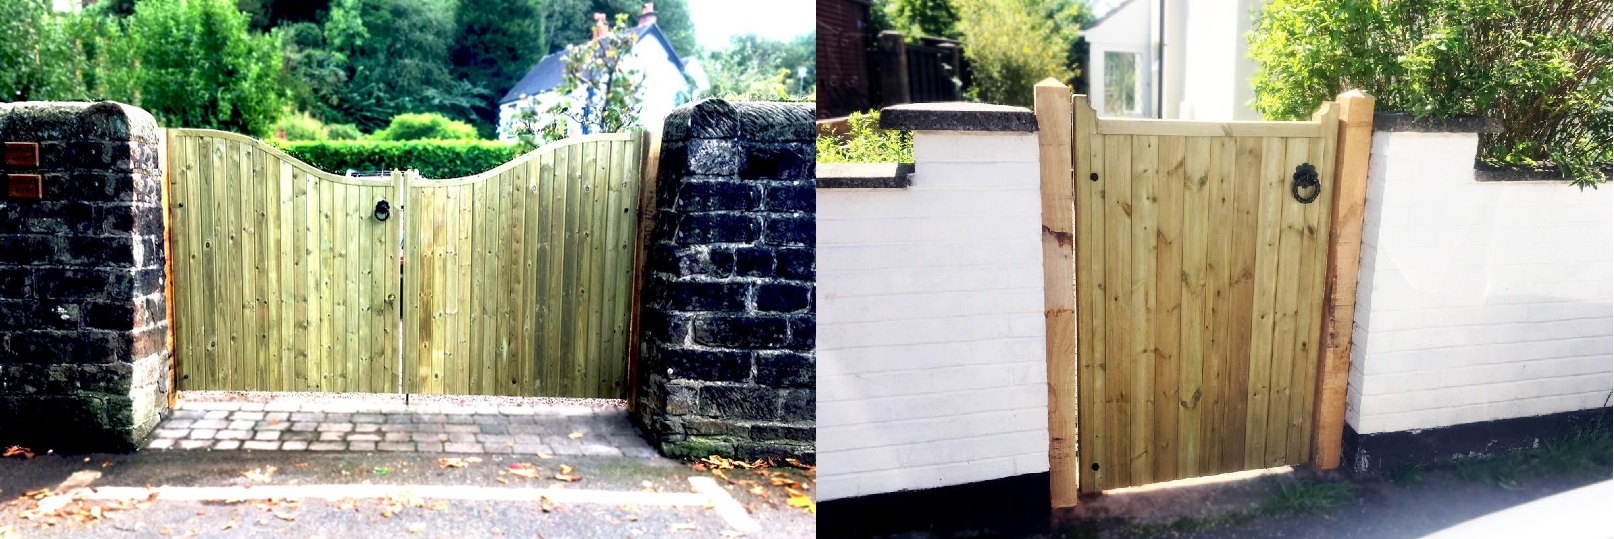 pressure treated wooden gate examples